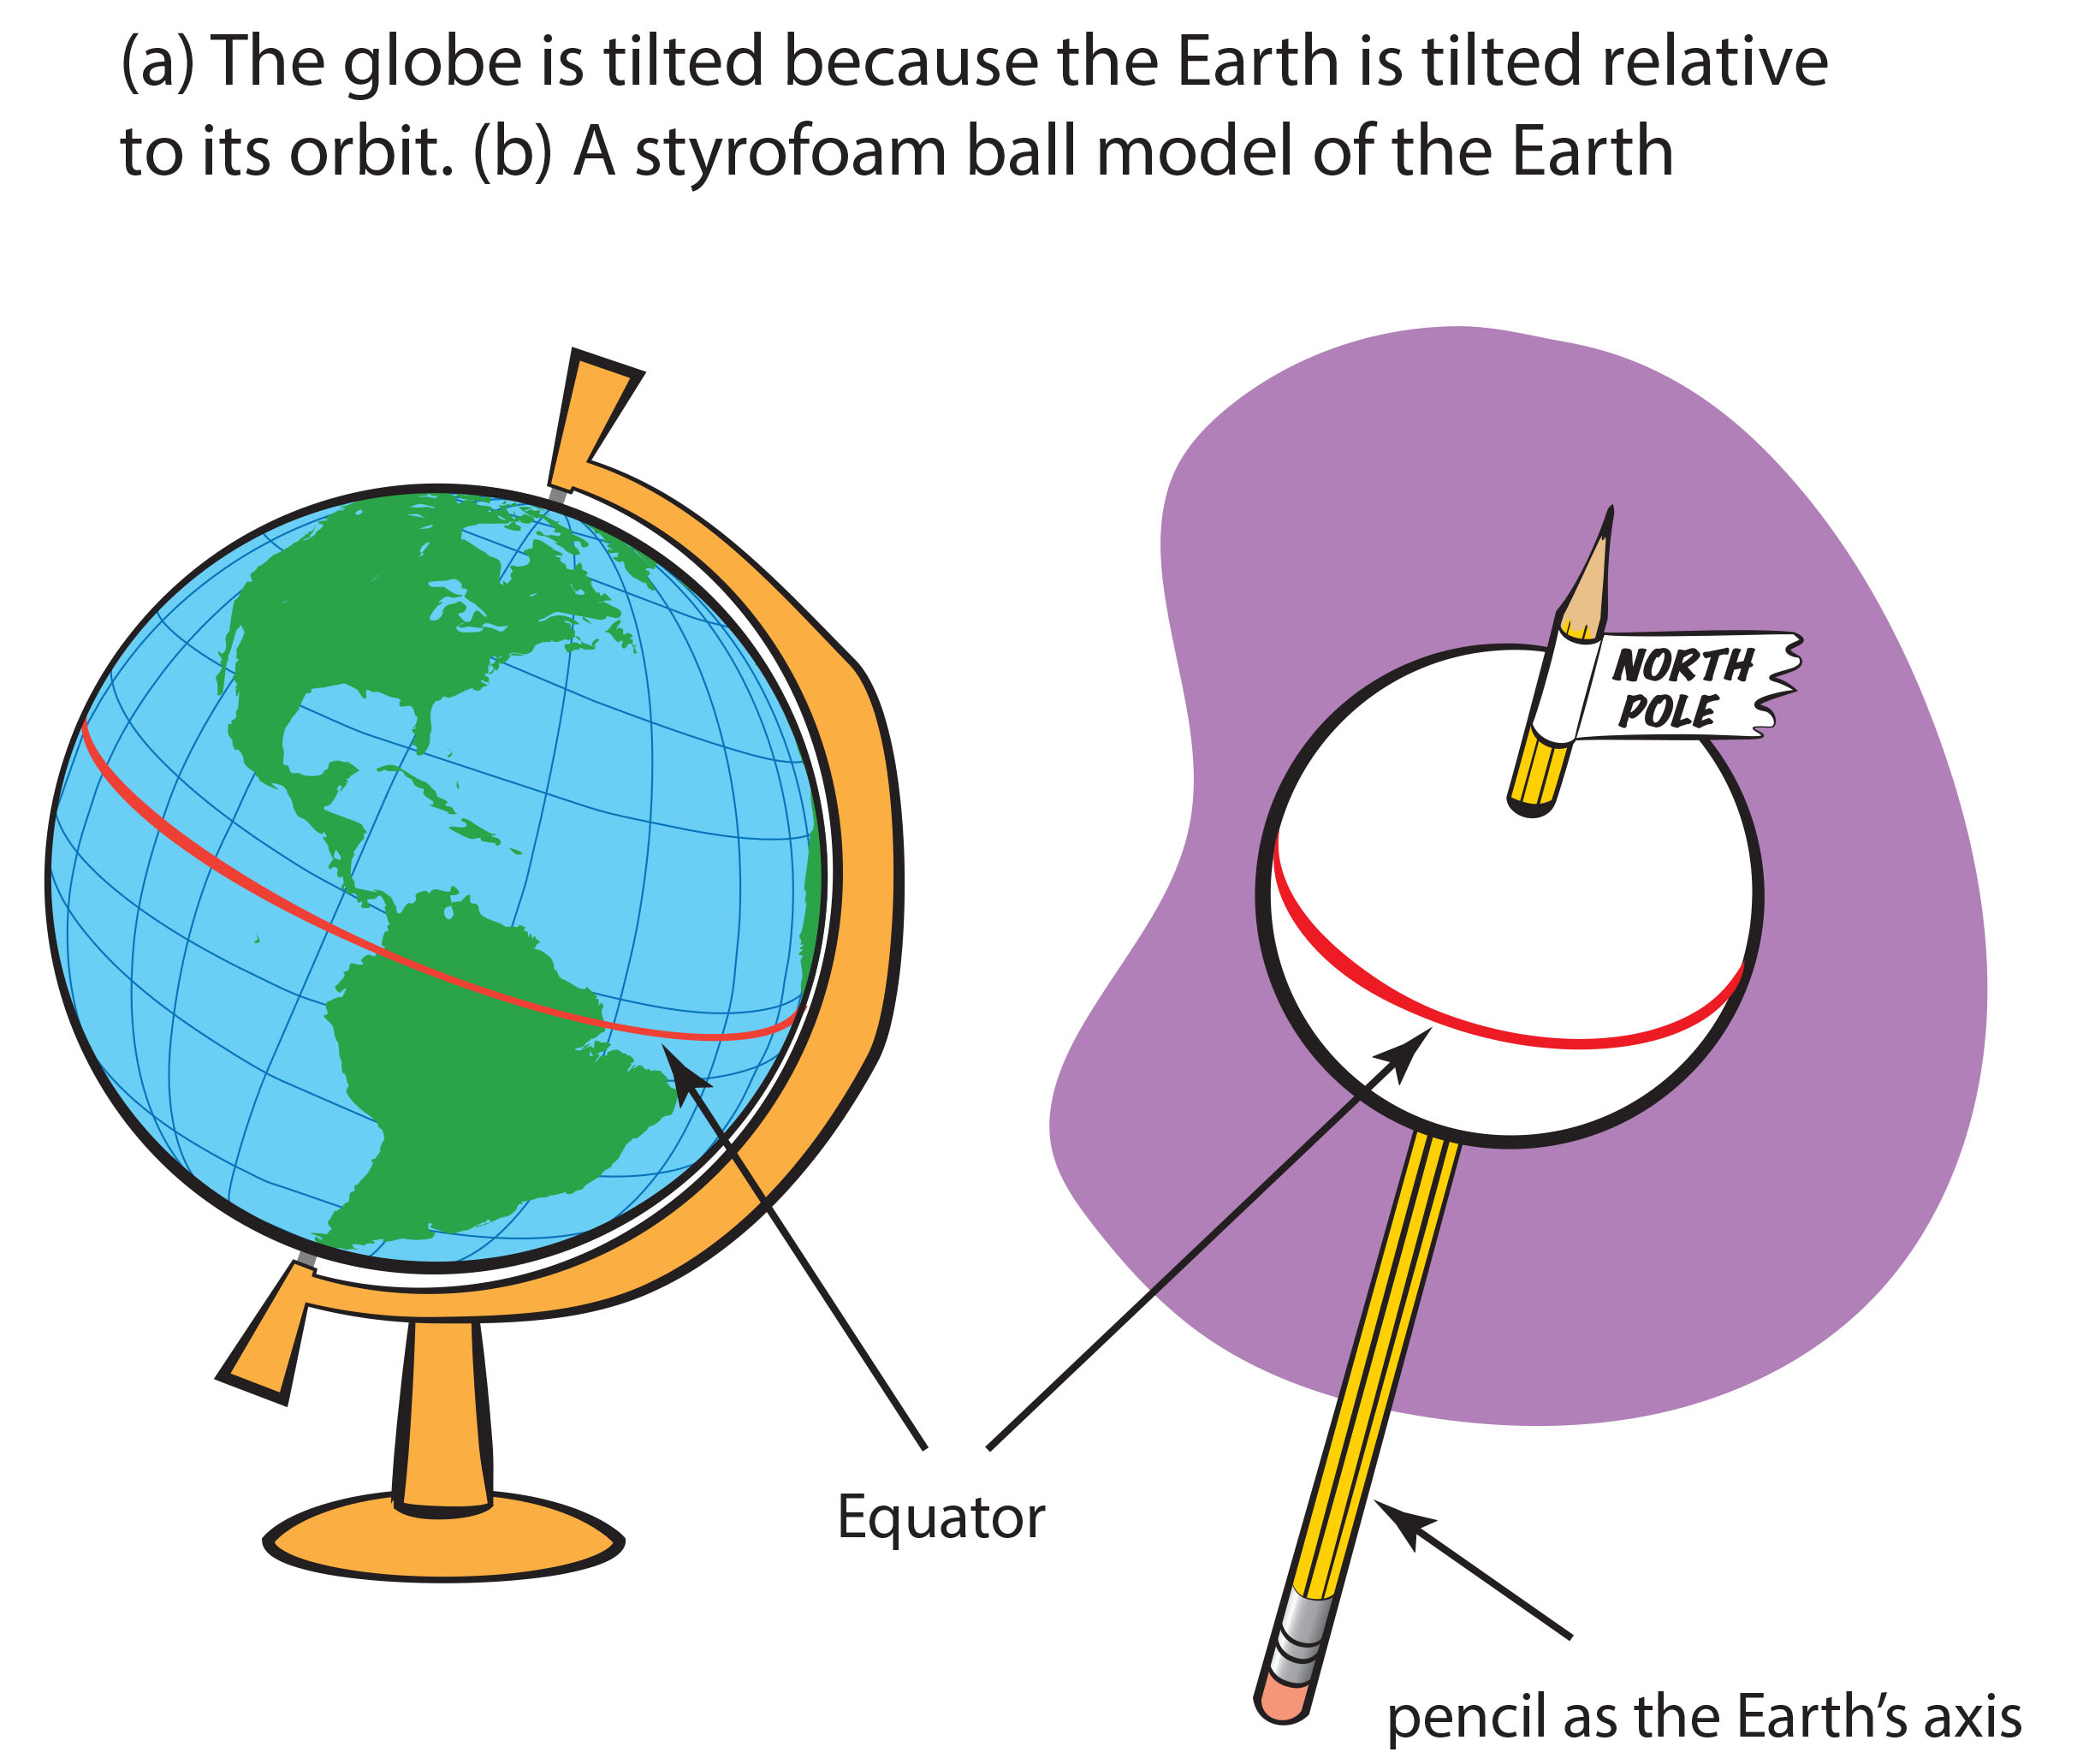 (a) The globe is tilted because the Earth is tilted relative to its orbit. (b) A Styrofoam model of the Earth.